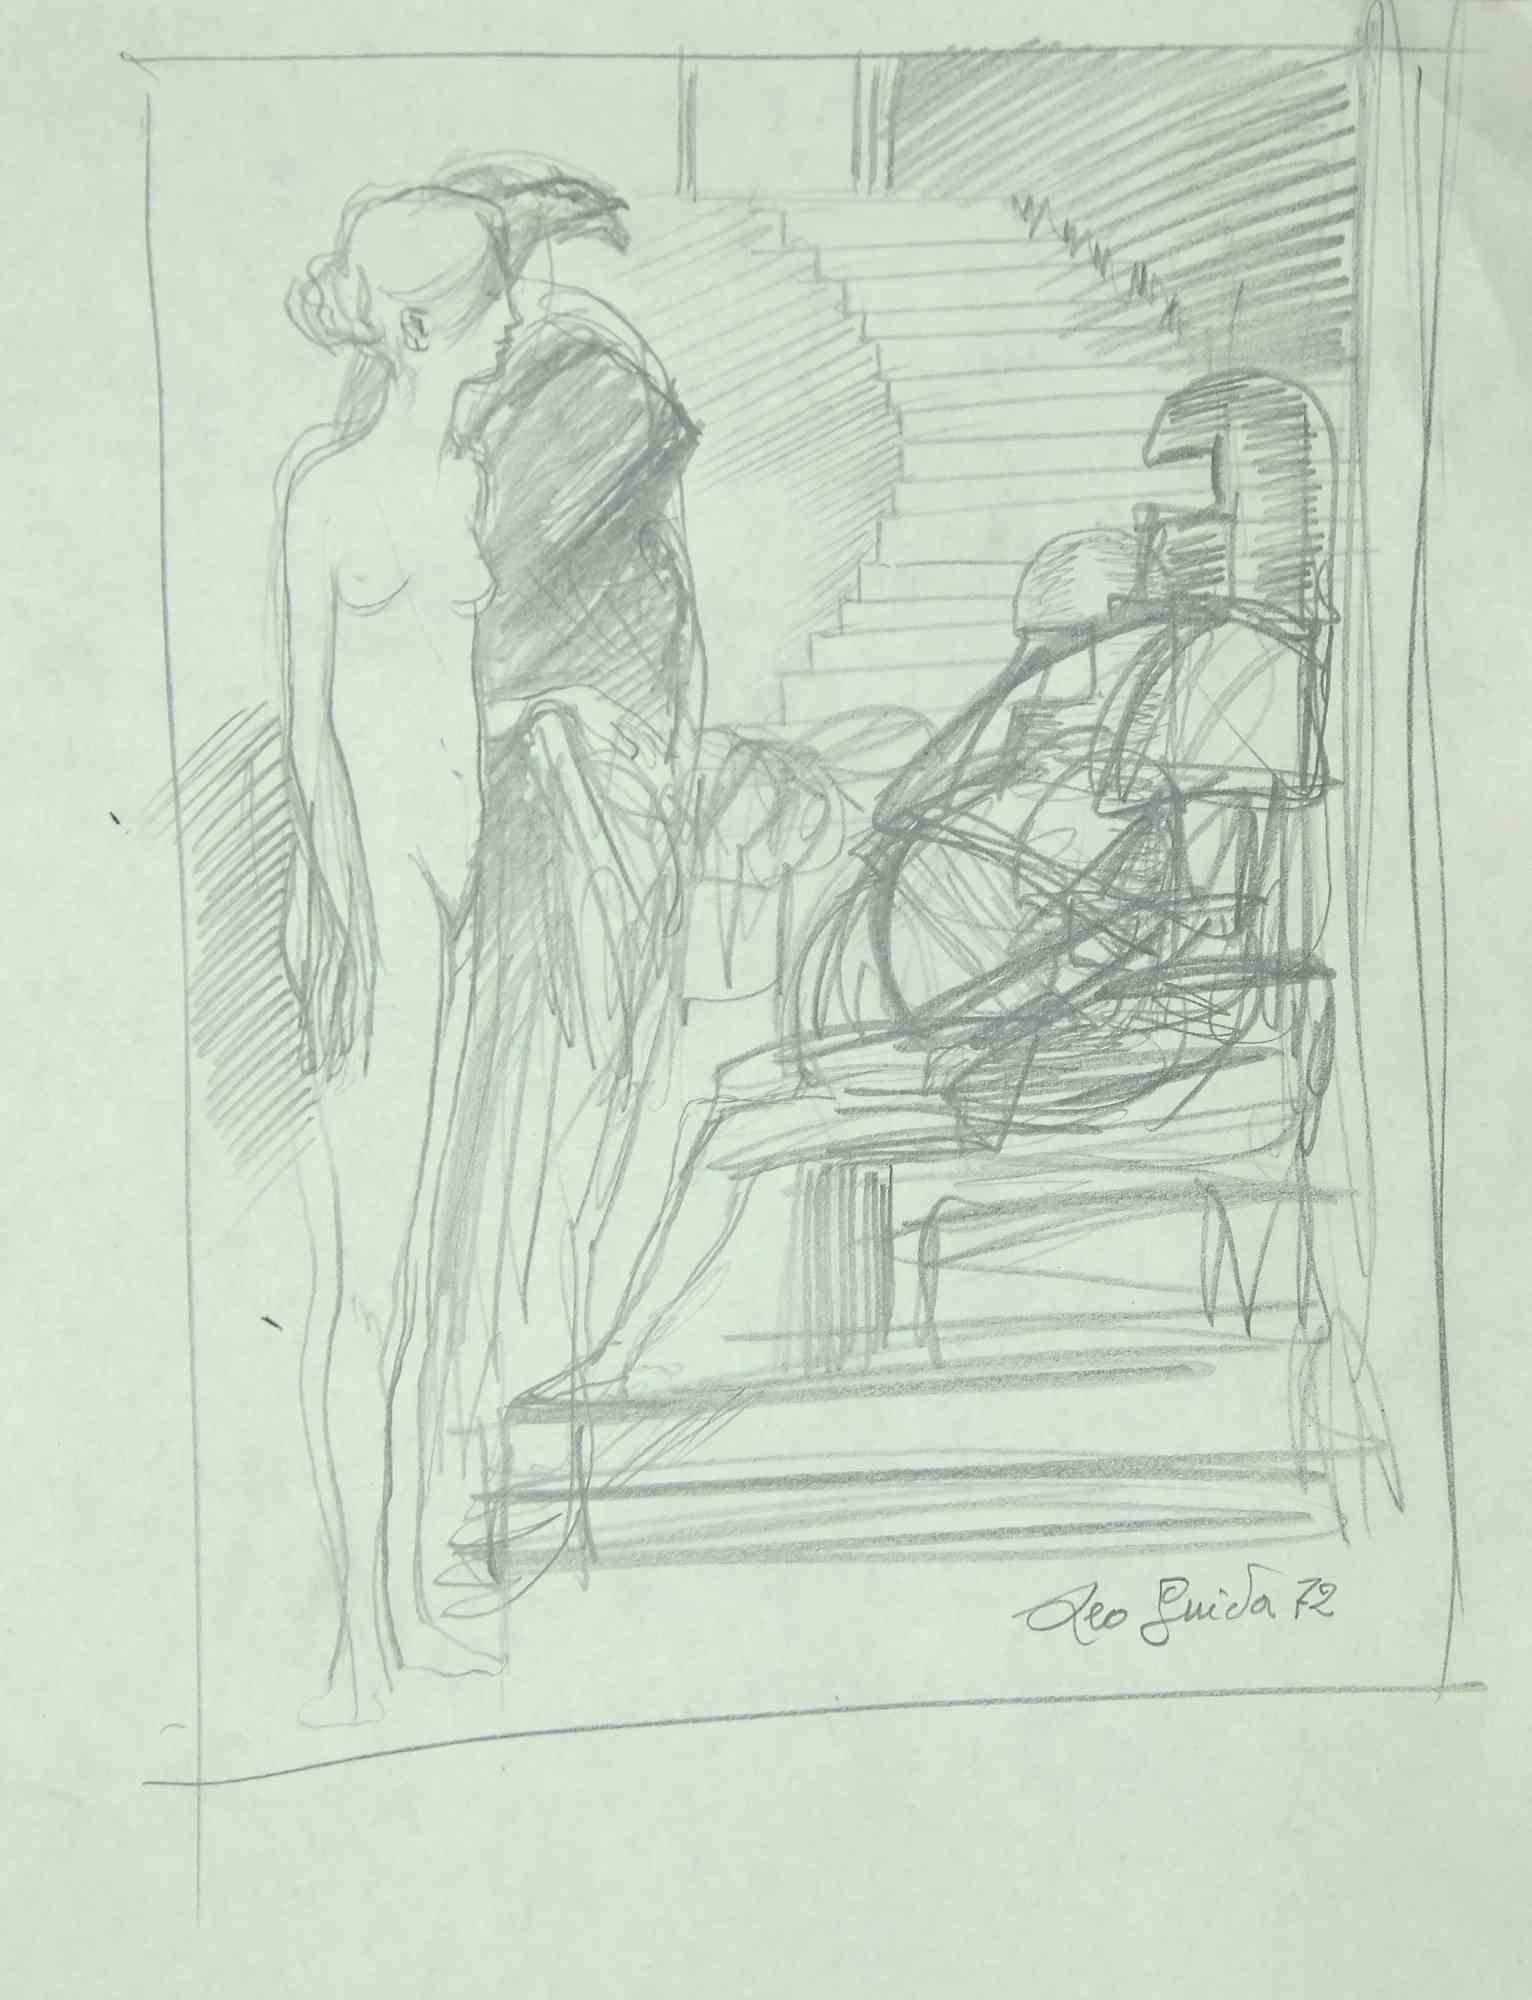 Nude is an original artwork realized  in 1972 by the italian Contemporary artist  Leo Guida  (1992 - 2017).

Original pencil drawing on ivory-colored paper.

Hand-signed and dated on the lower margins.

This artwork represents a nude standing woman